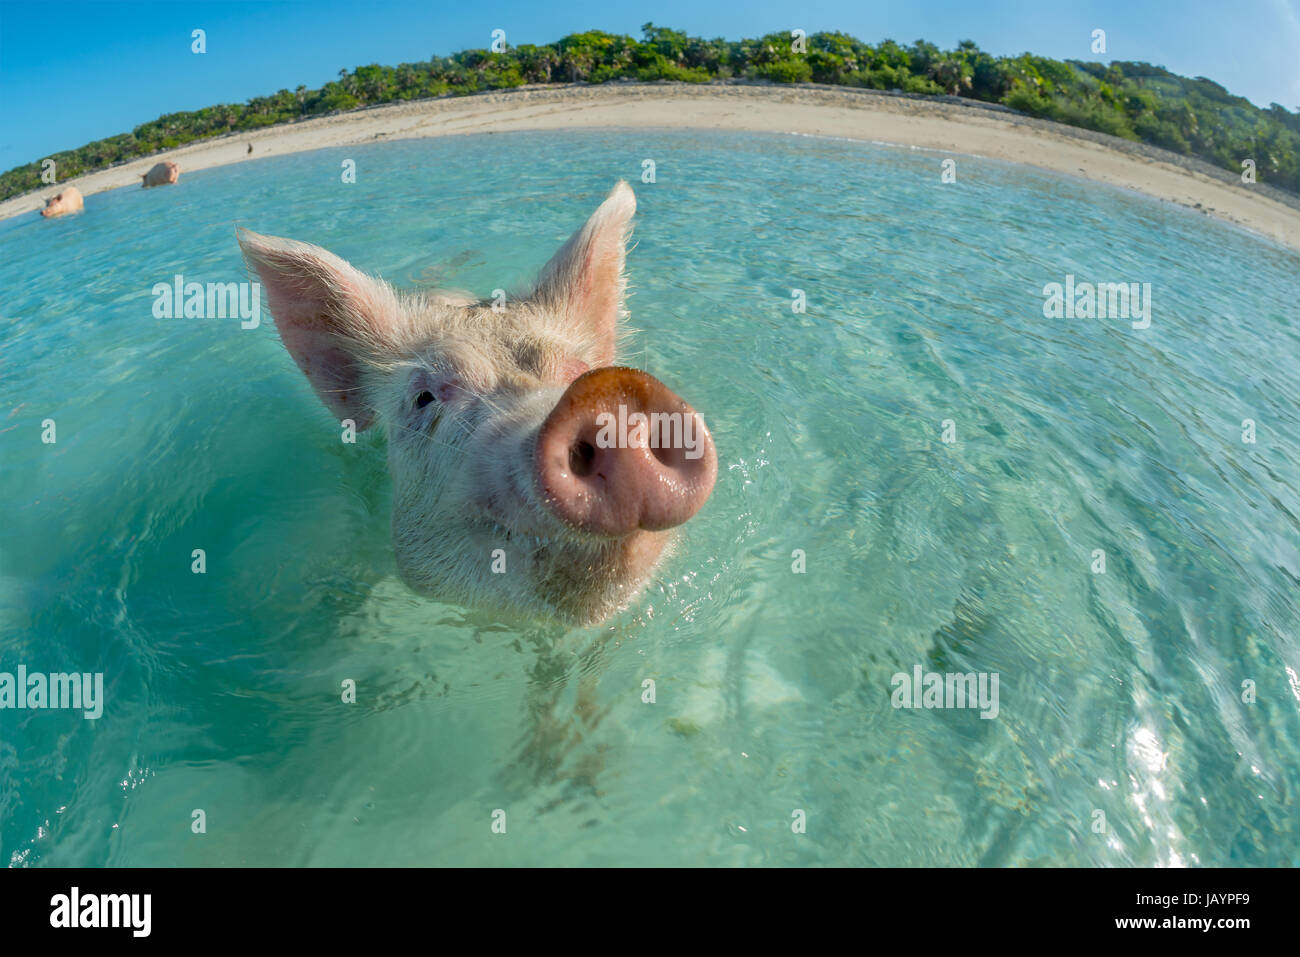 Contented pink swimming pig in the turquoise sea. Bahamas, December Stock Photo